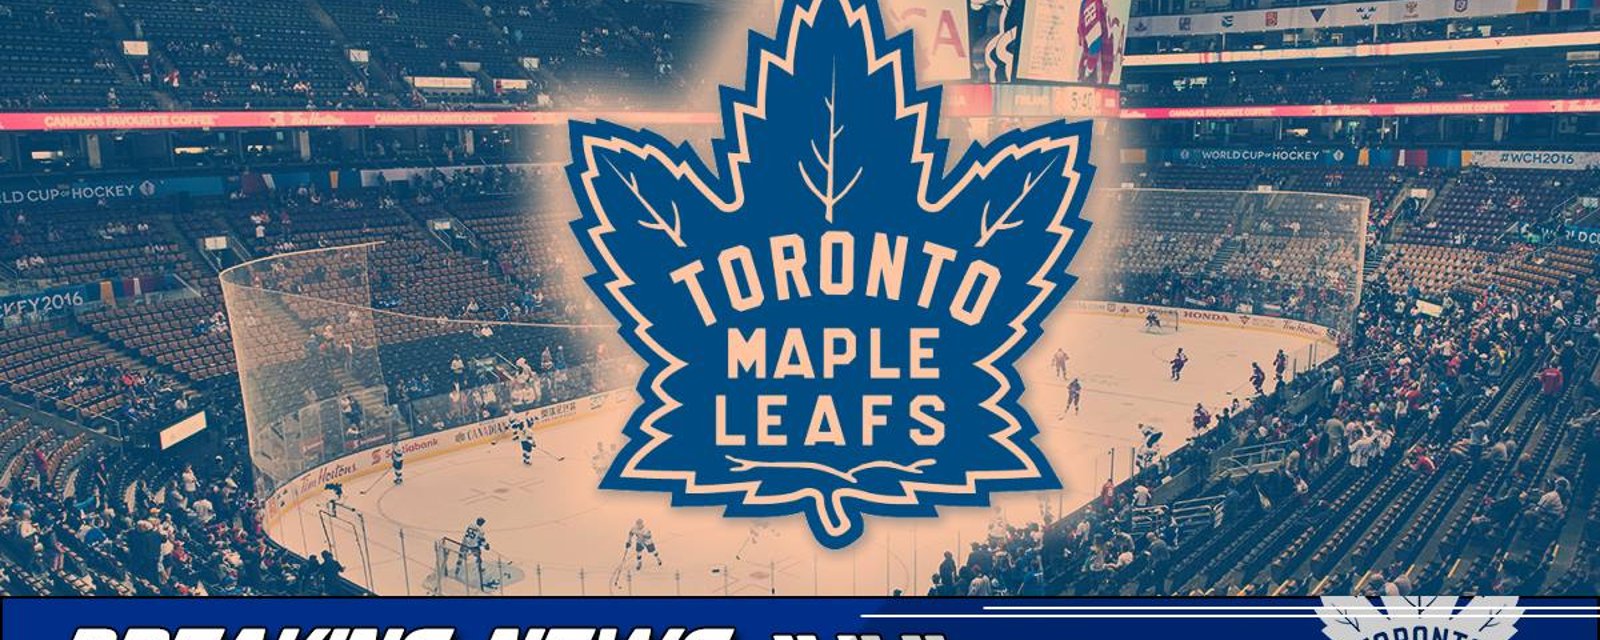 Report: Team of Maple Leafs scouts spotted watching two rivals teams.